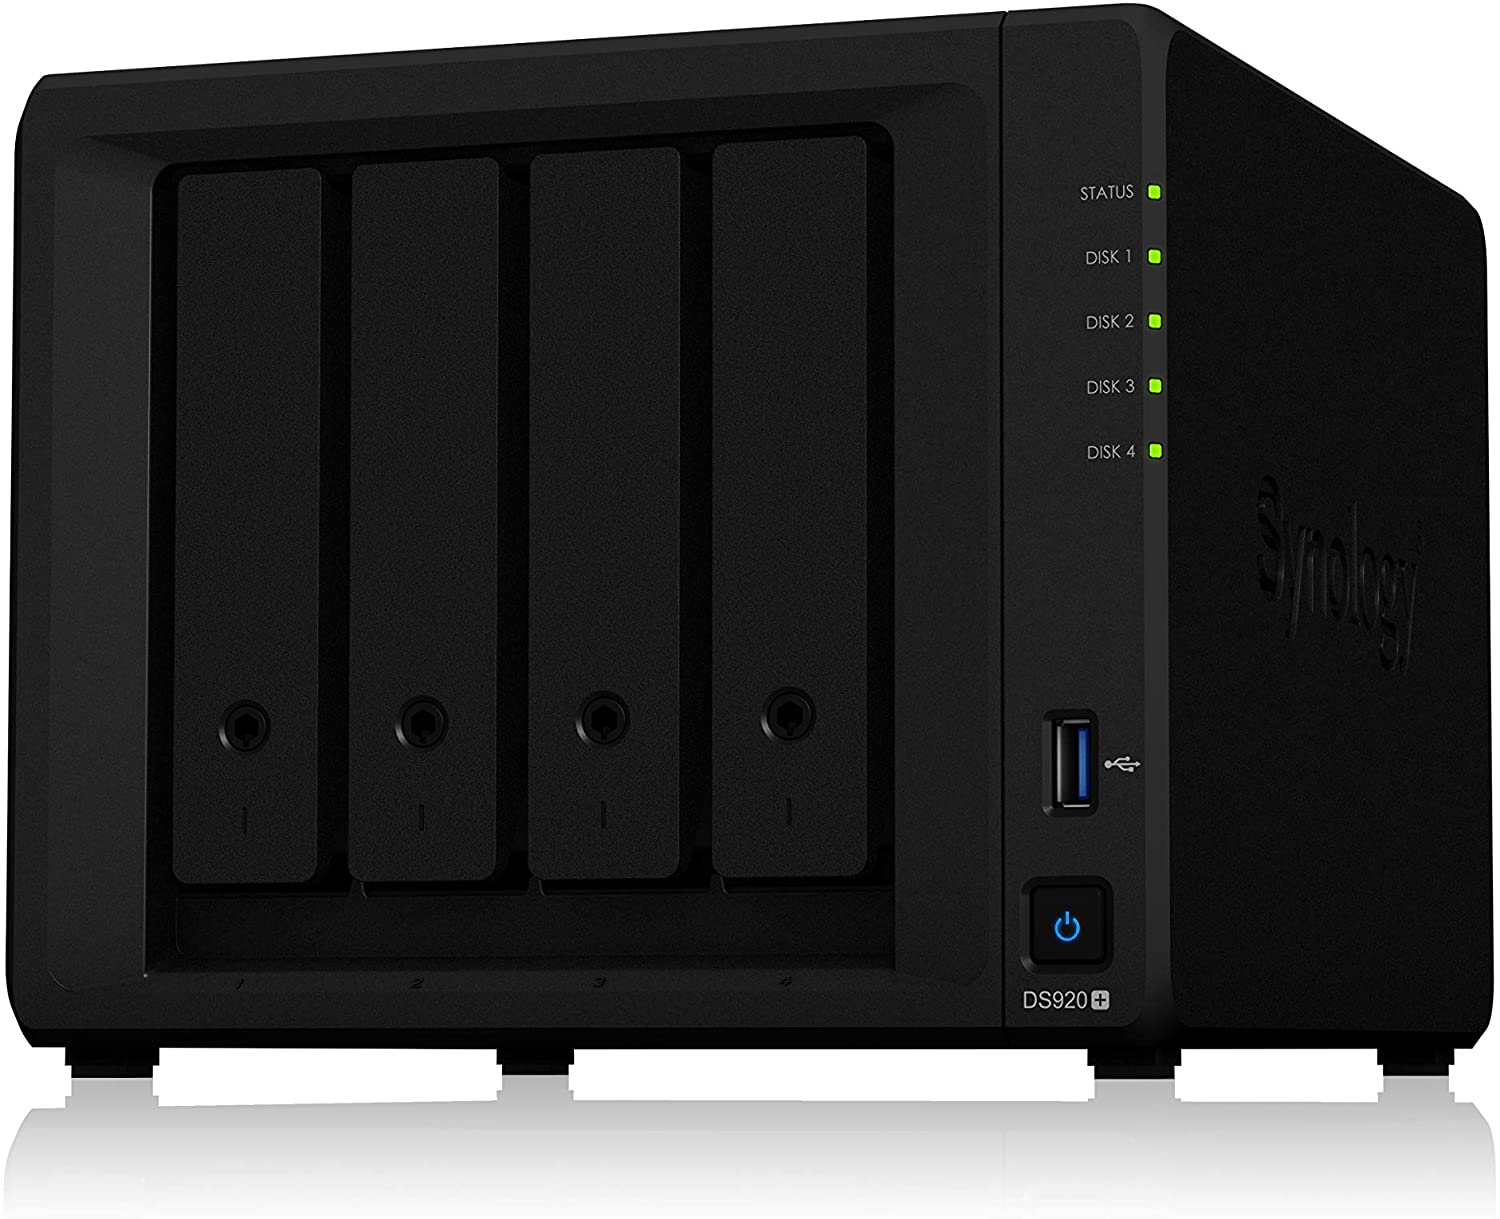 Synology DS920+ Quad Core 2.0 GHz / 4 bay NAS DiskStation 